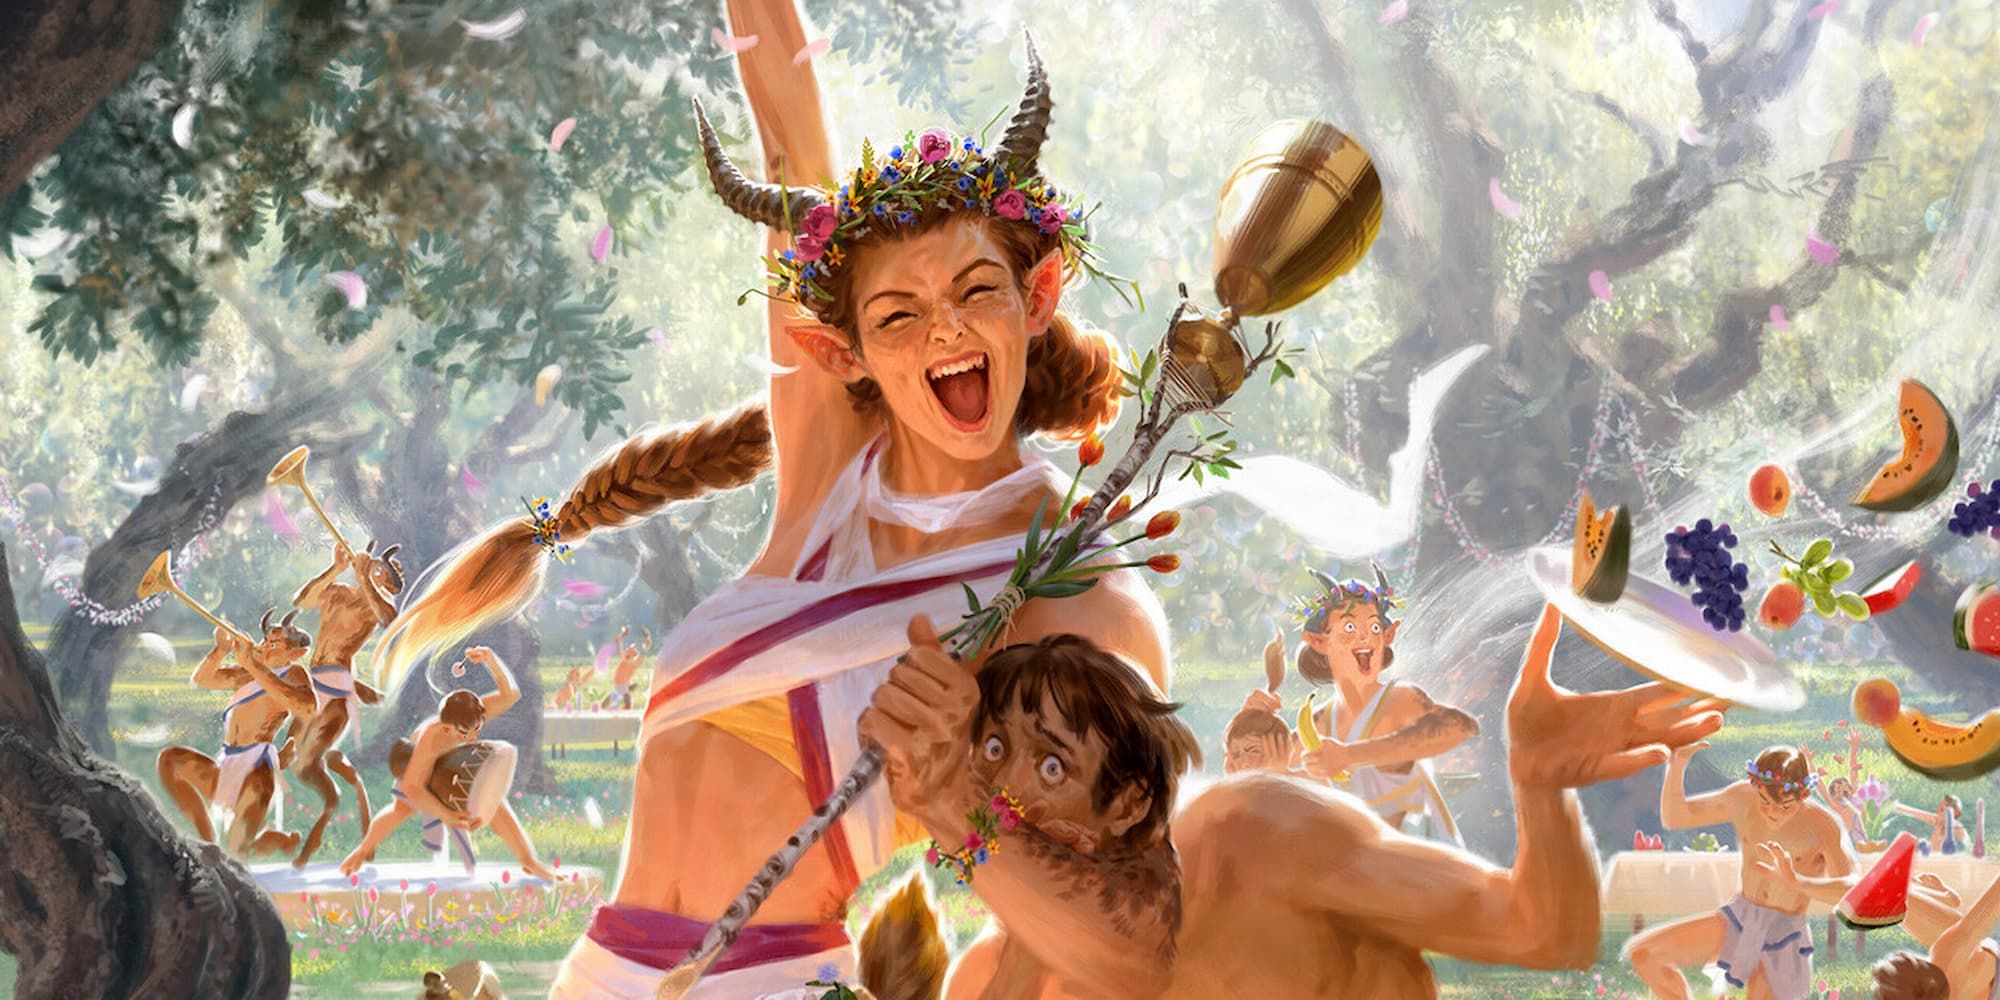 A satyr dancing at a festival with a man locked in her left arm by the head